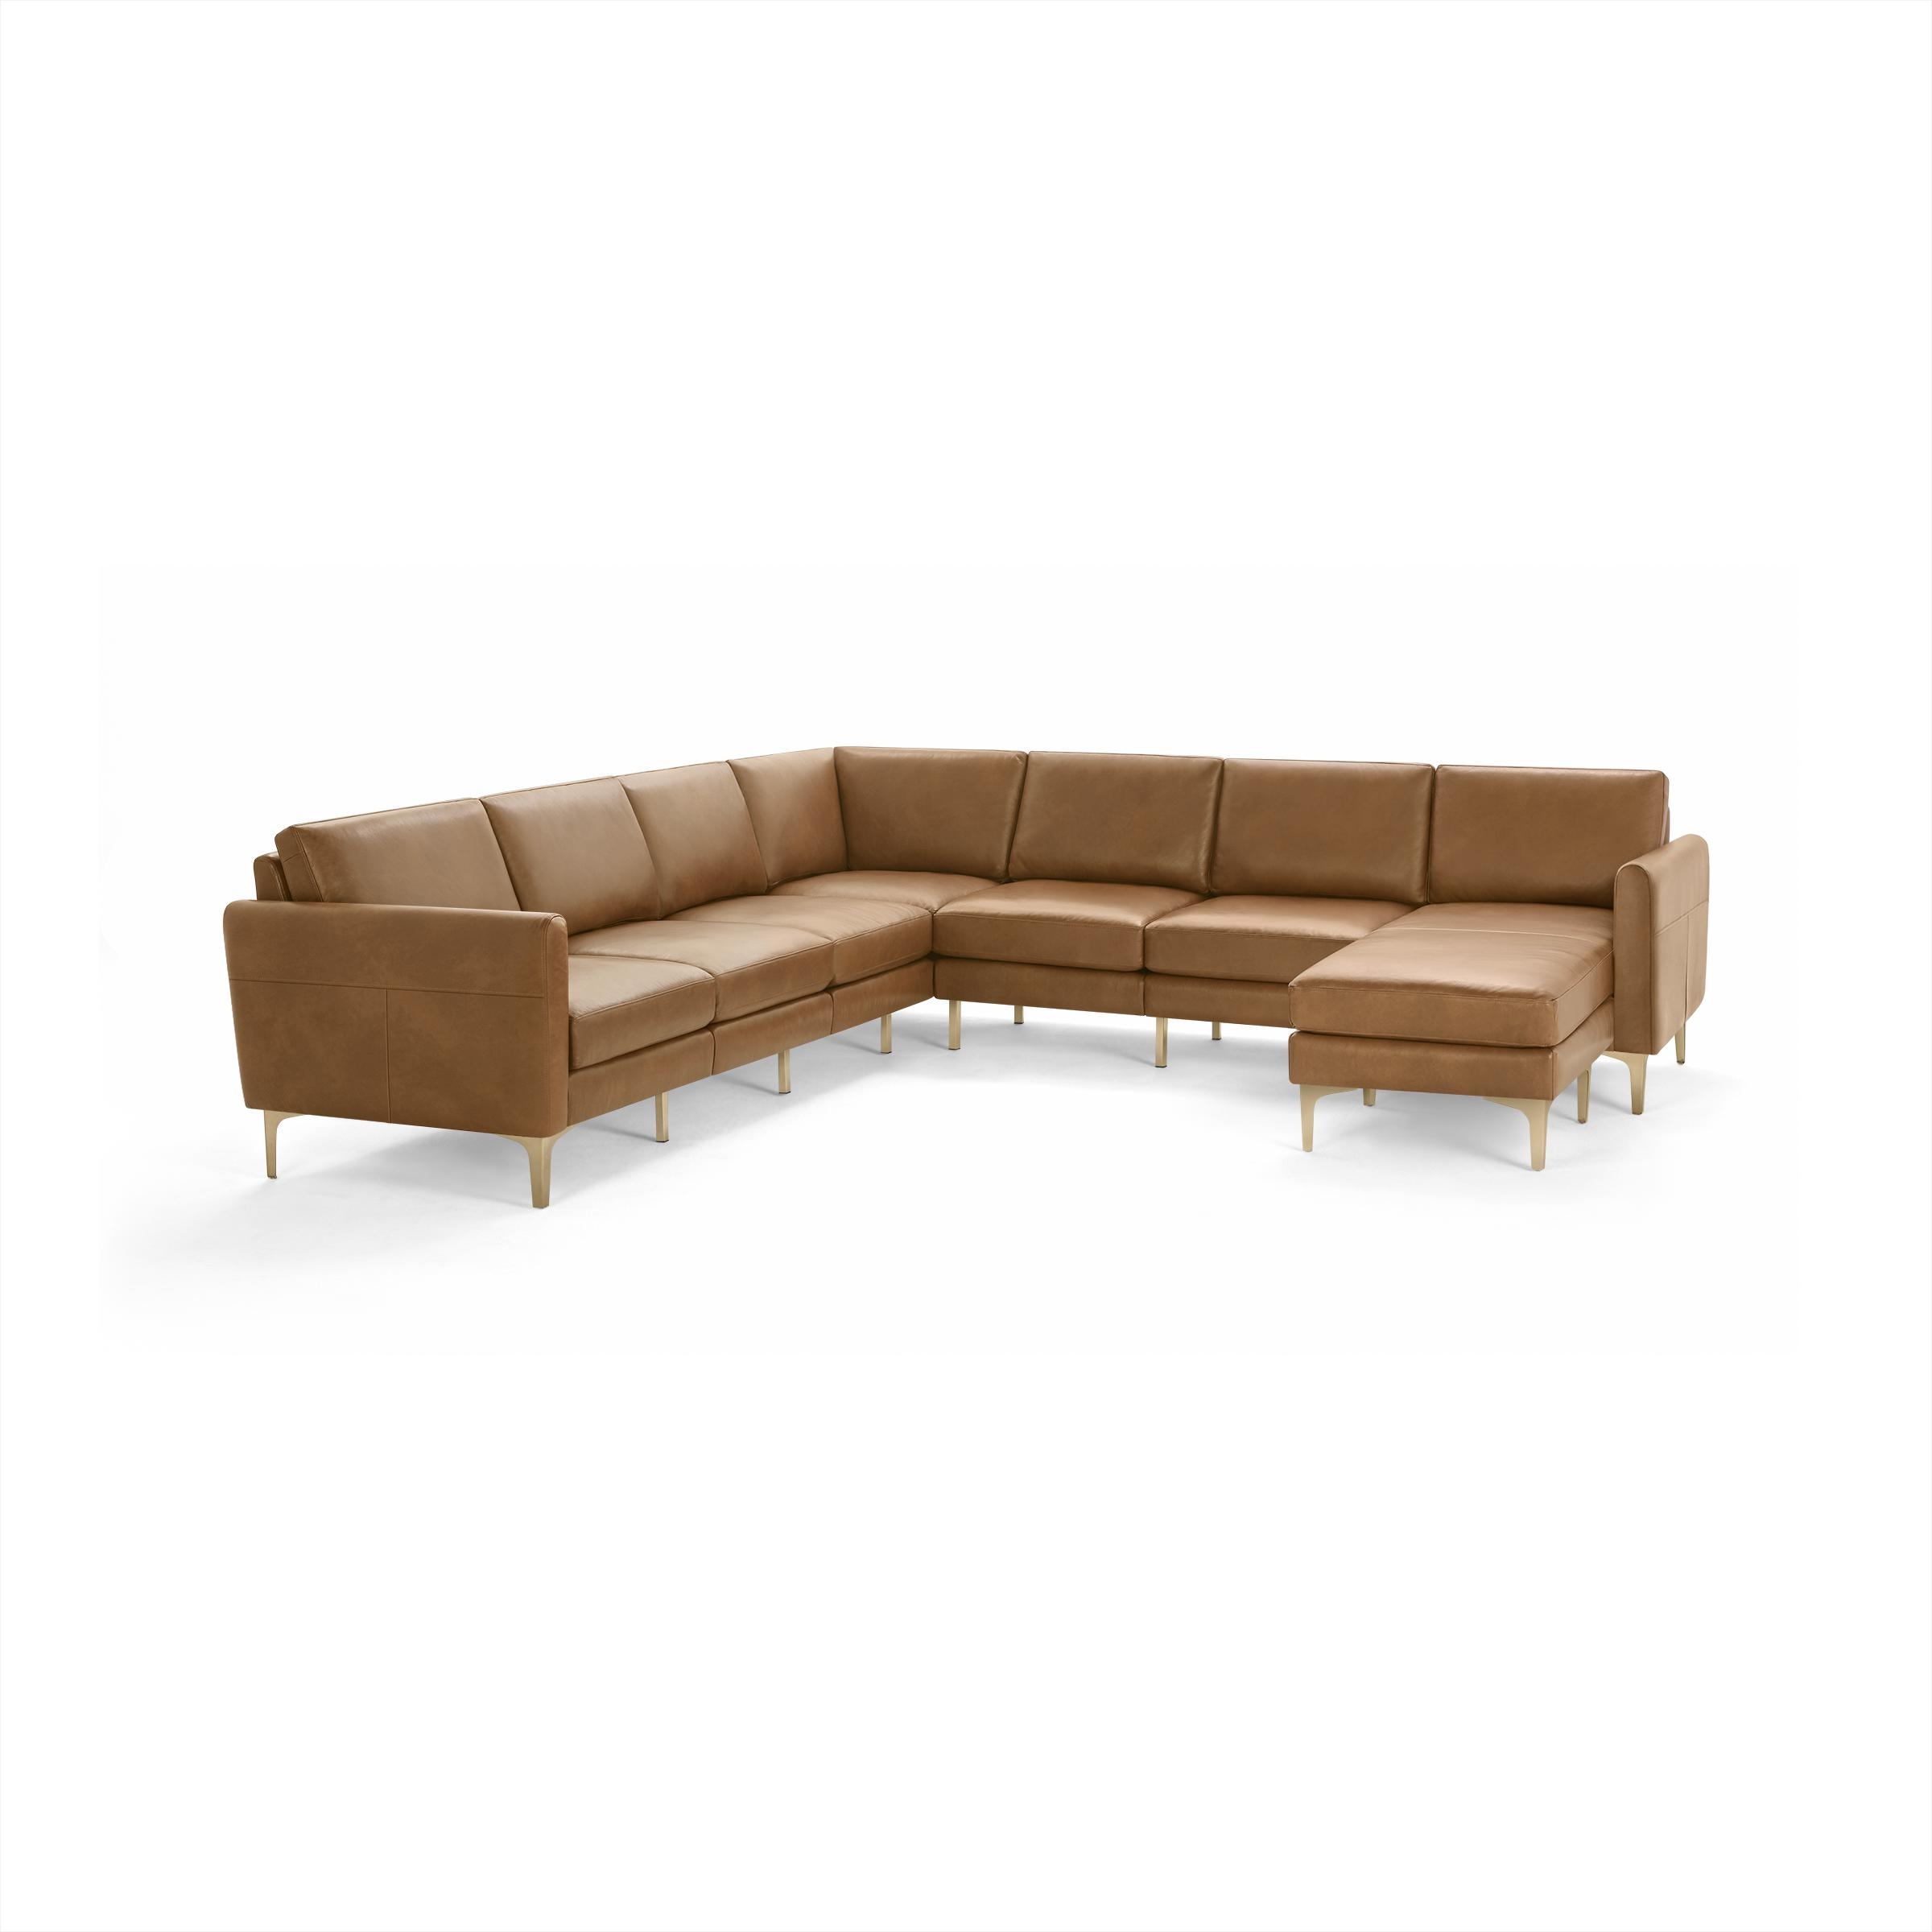 Nomad Leather 7-Seat Corner Sectional with Chaise in Camel - Image 0